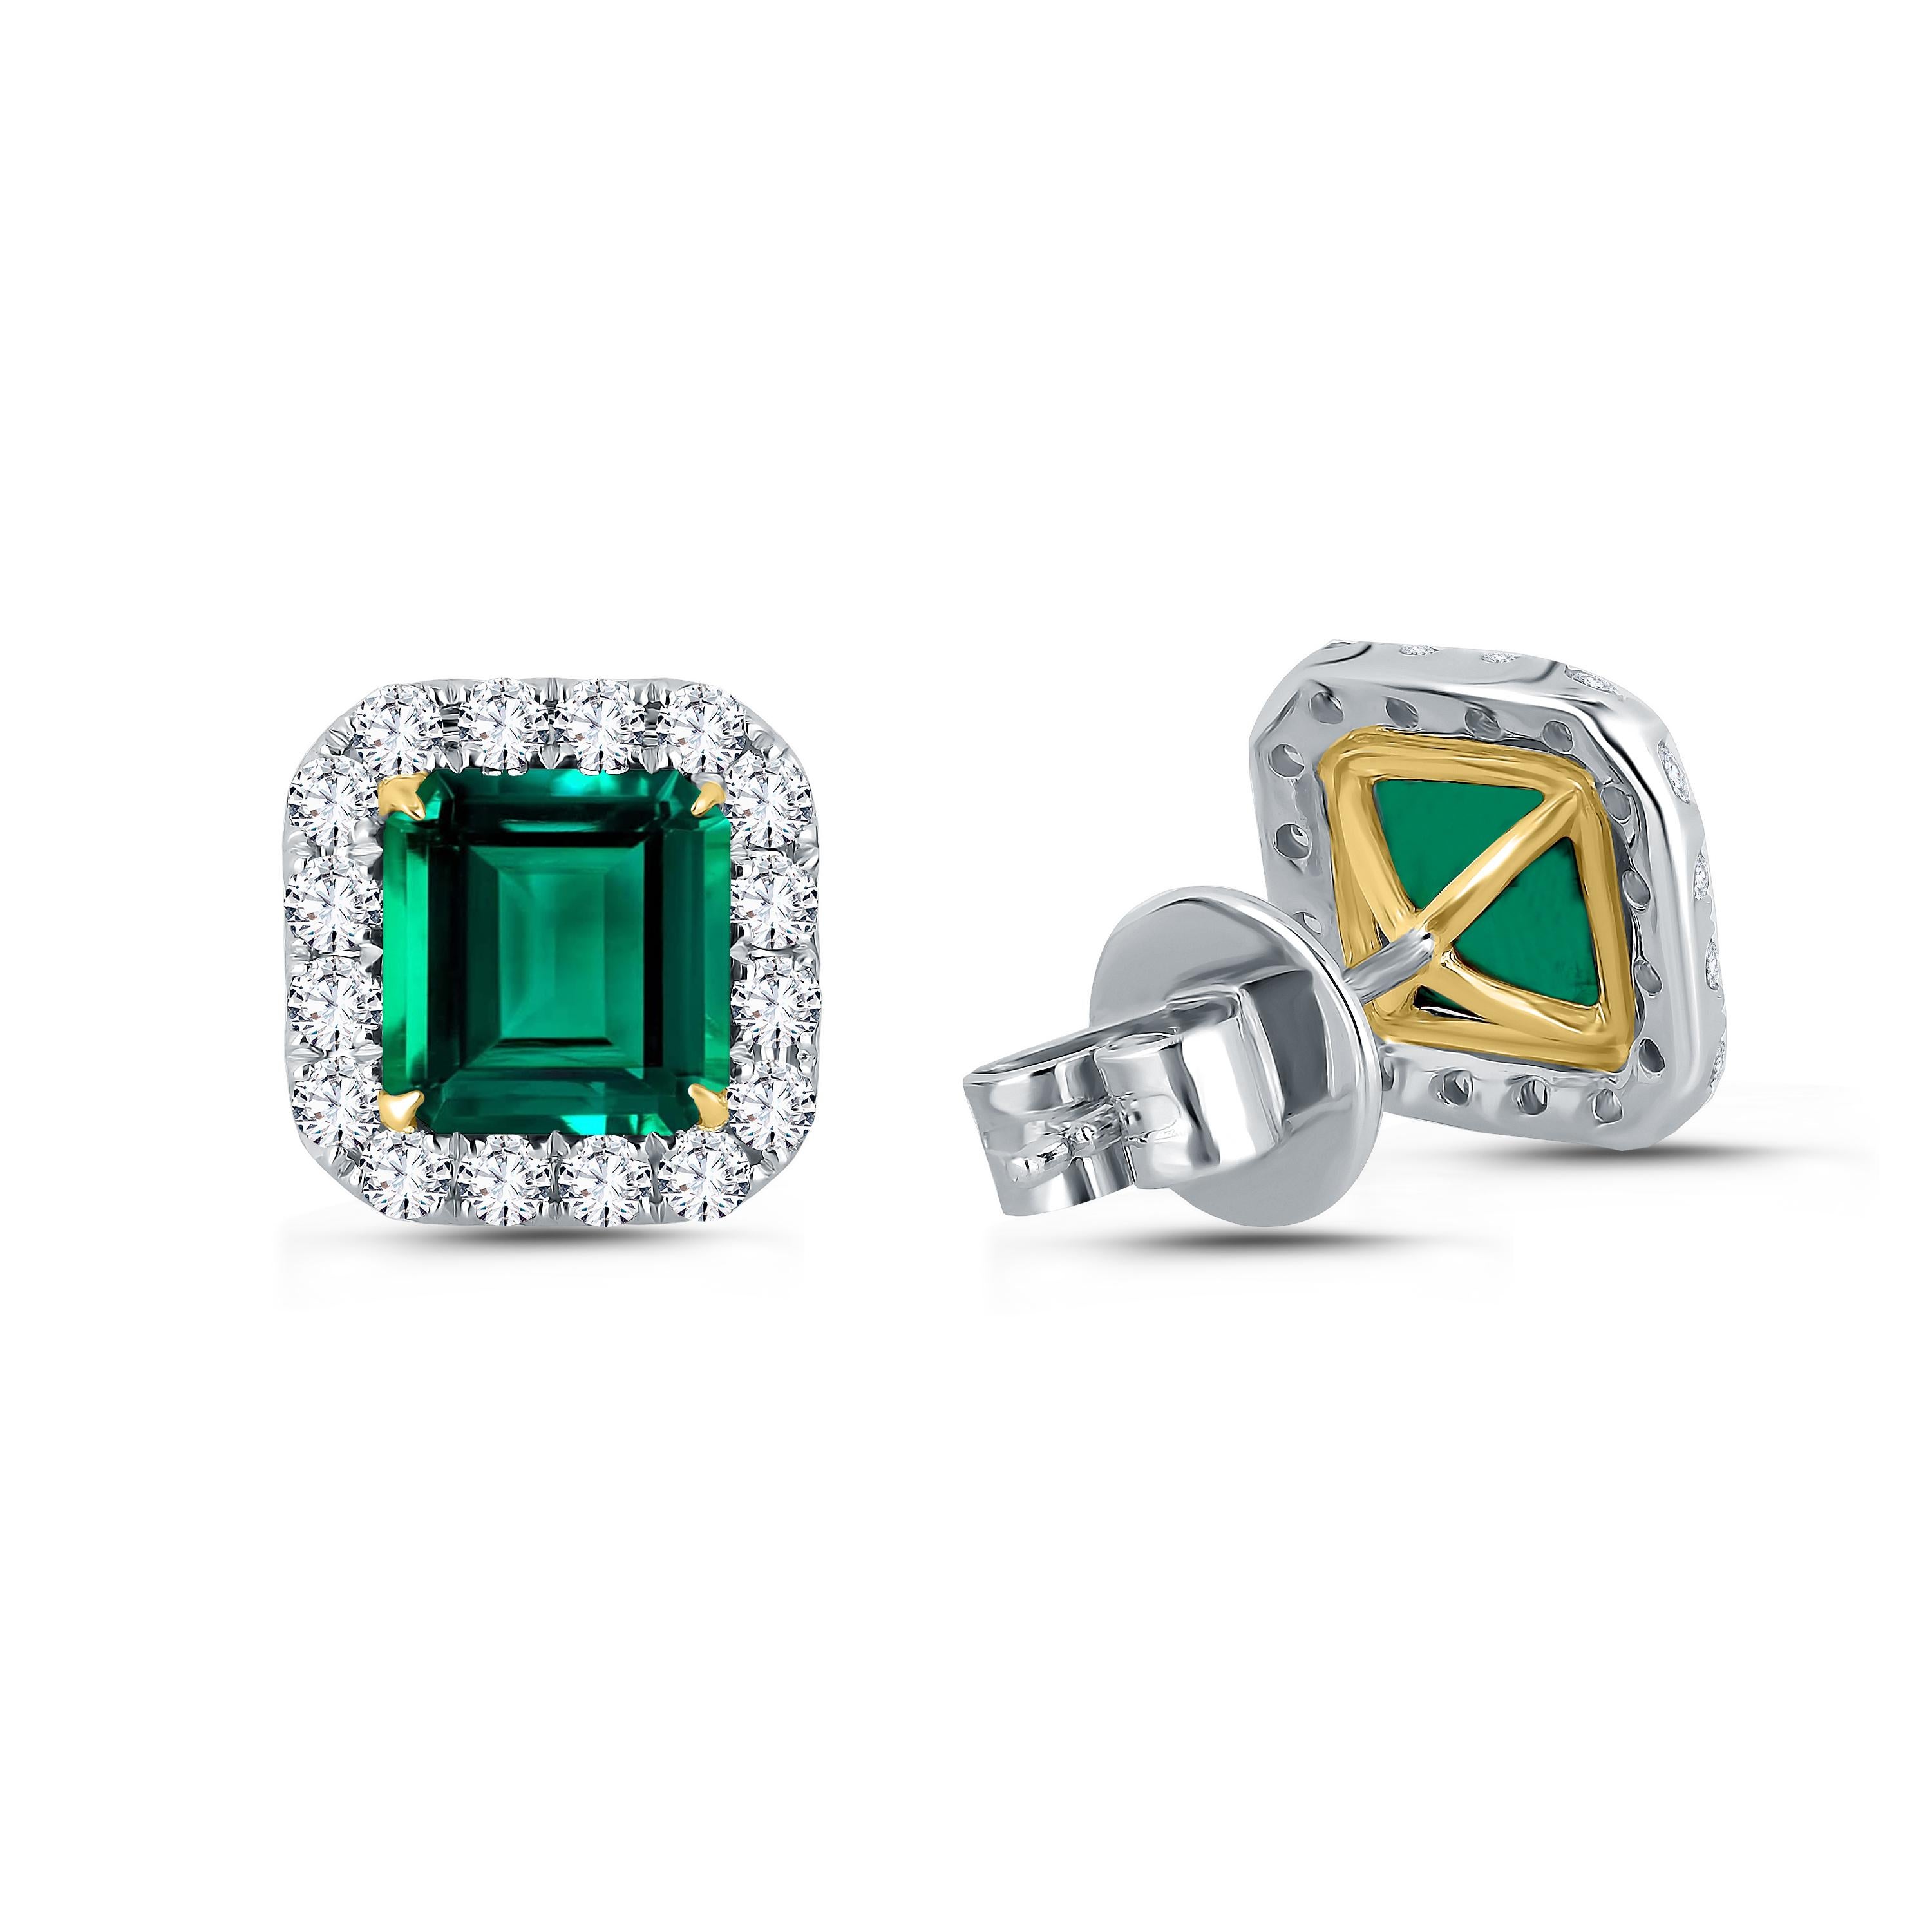 2.02 Carat Cushion Cut Emerald and Natural Diamond Earrings in 18k W/Y ref1628 For Sale 1